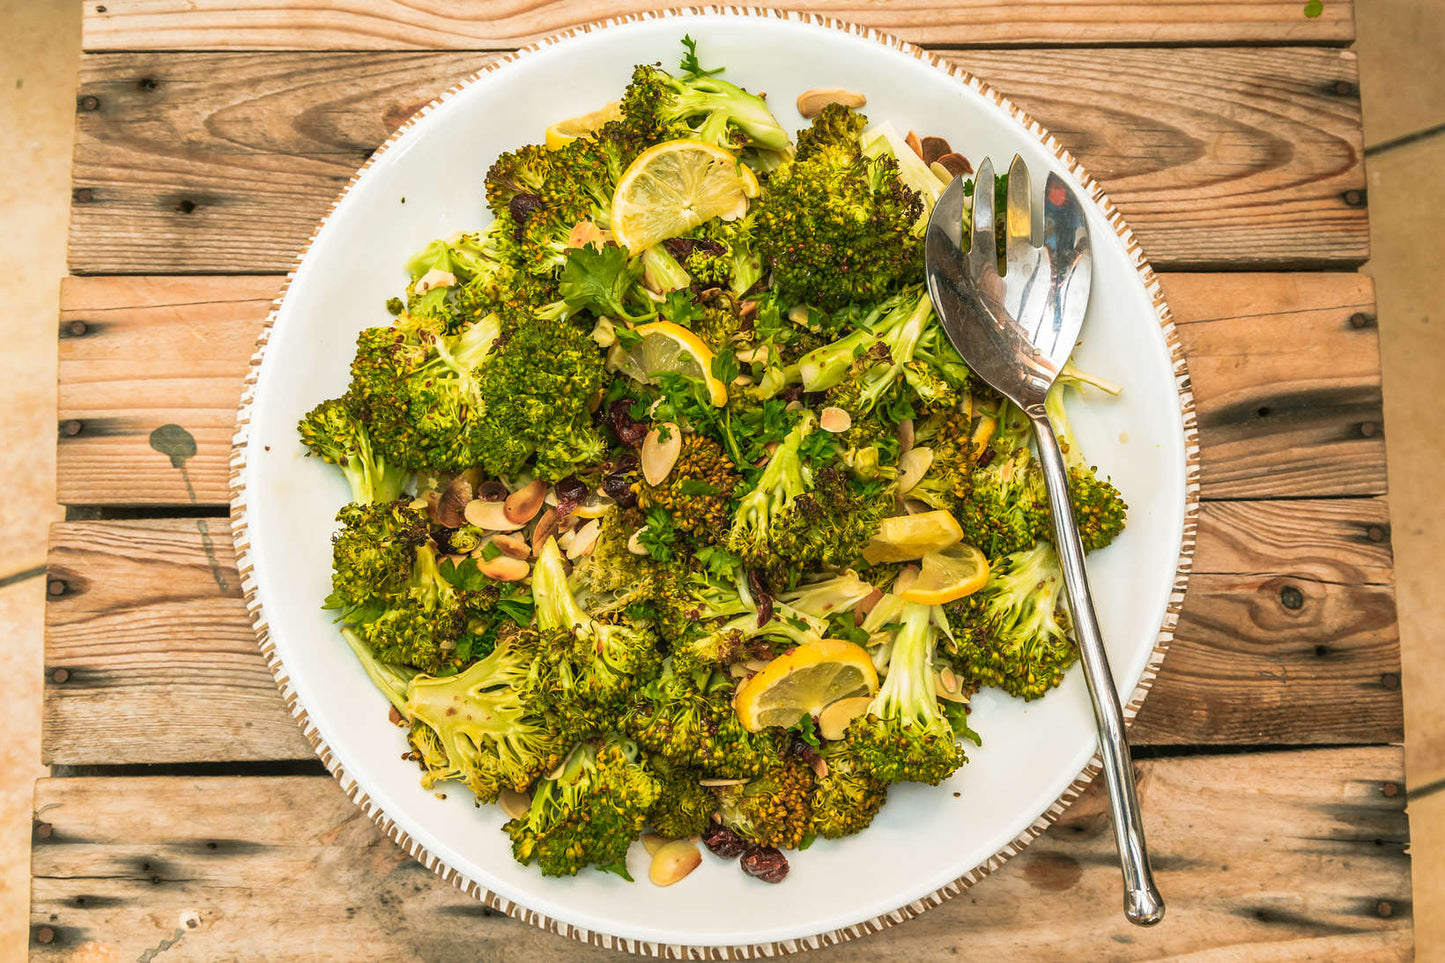 Roasted Broccoli with Cranberries and Lemon